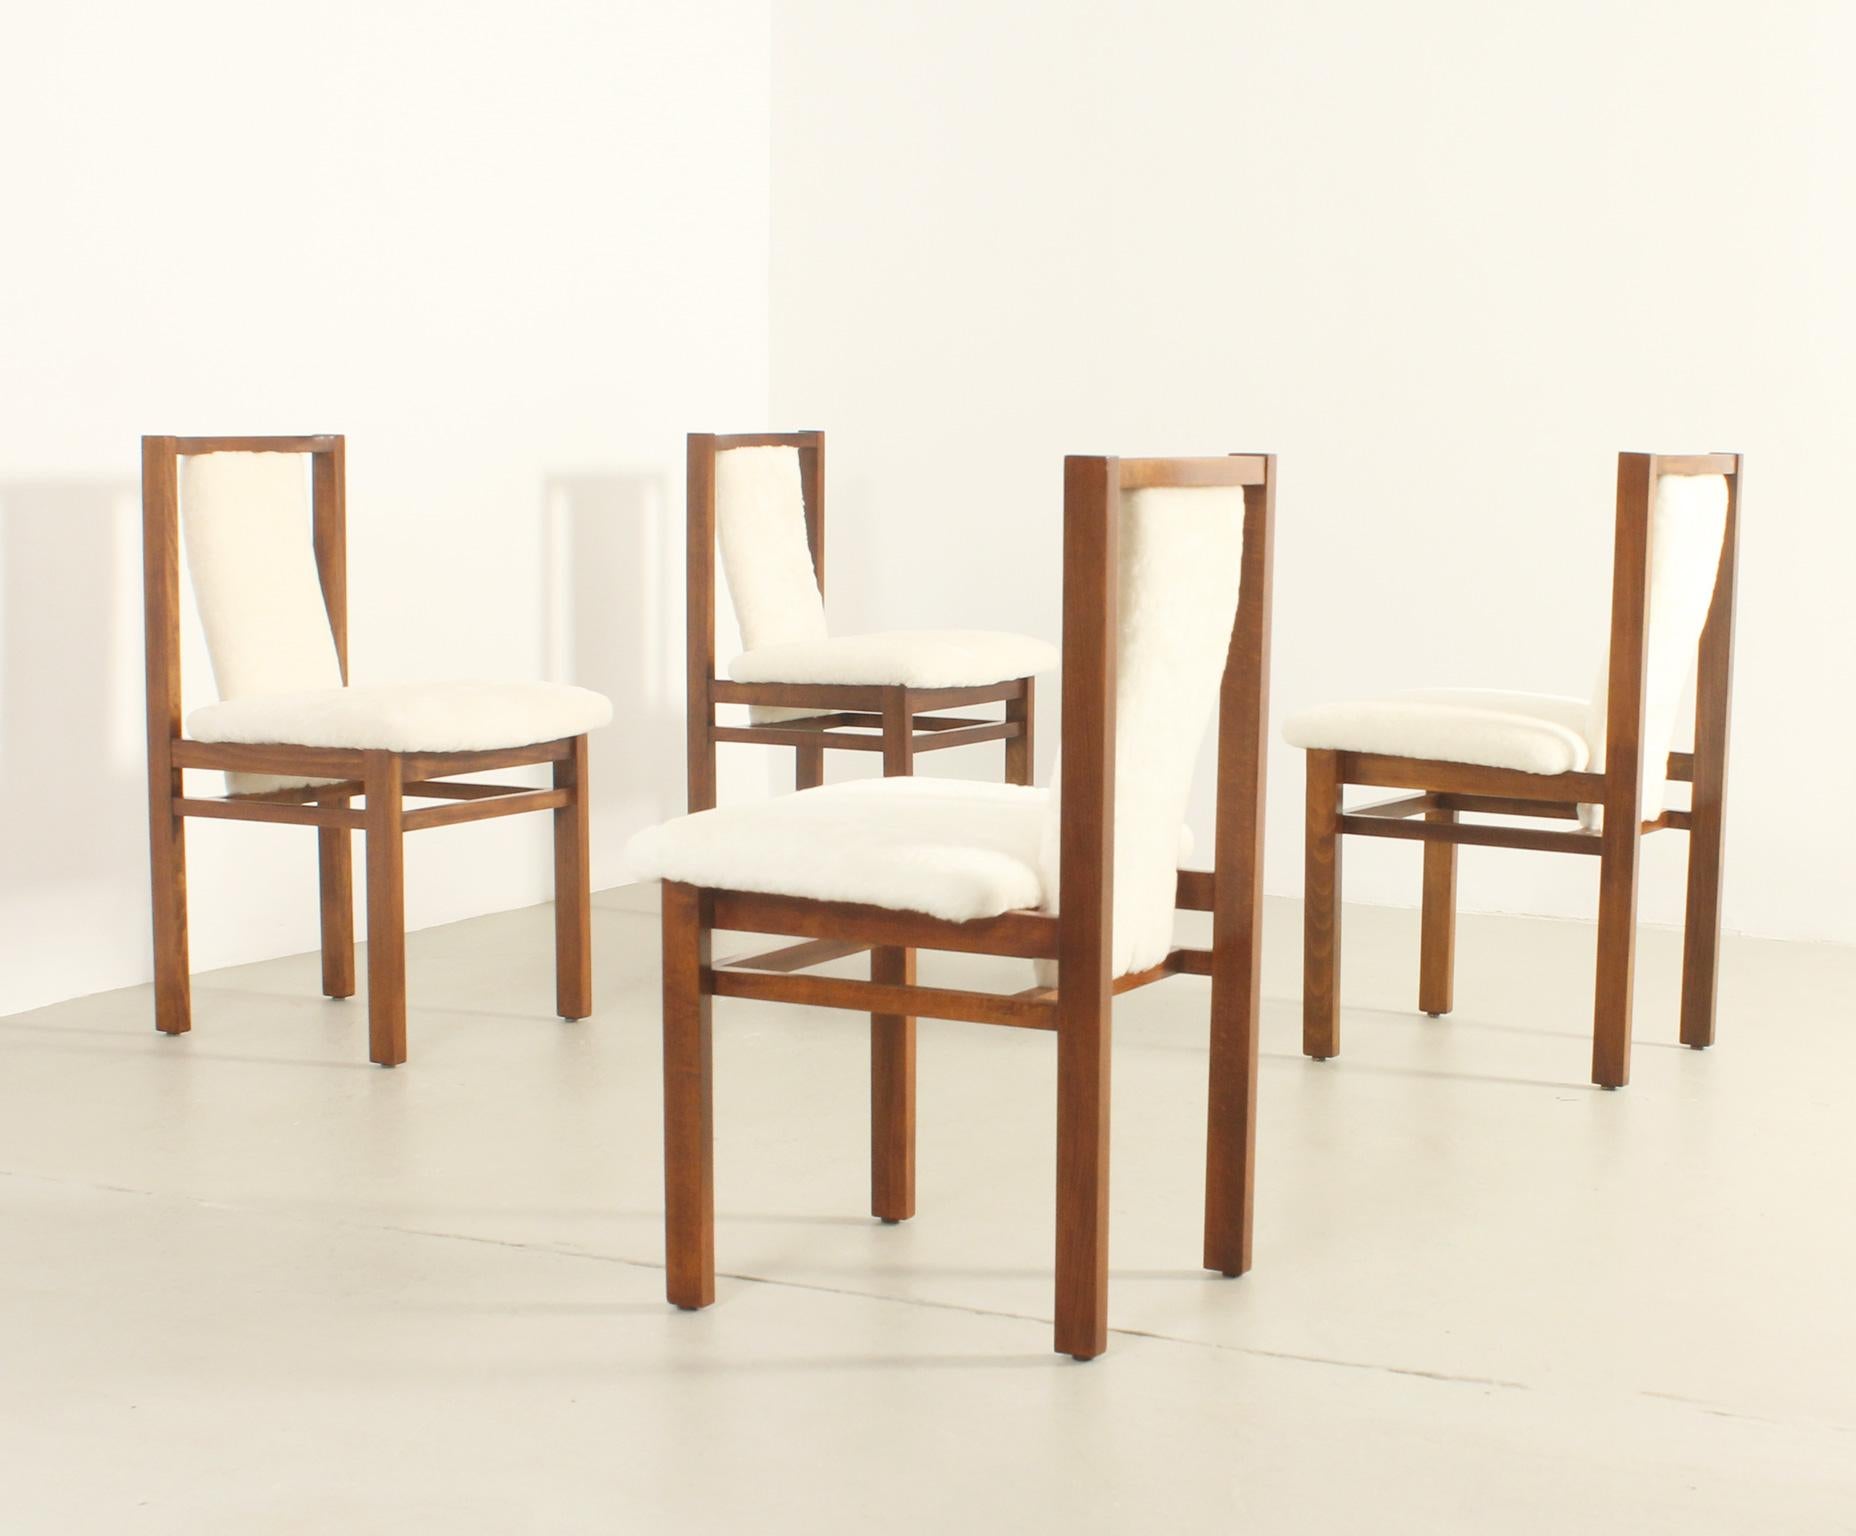 Set of four dining chairs by Jordi Vilanova, Spain, 1960's. Stained oak wood frame and new upholstery with sheepskin.